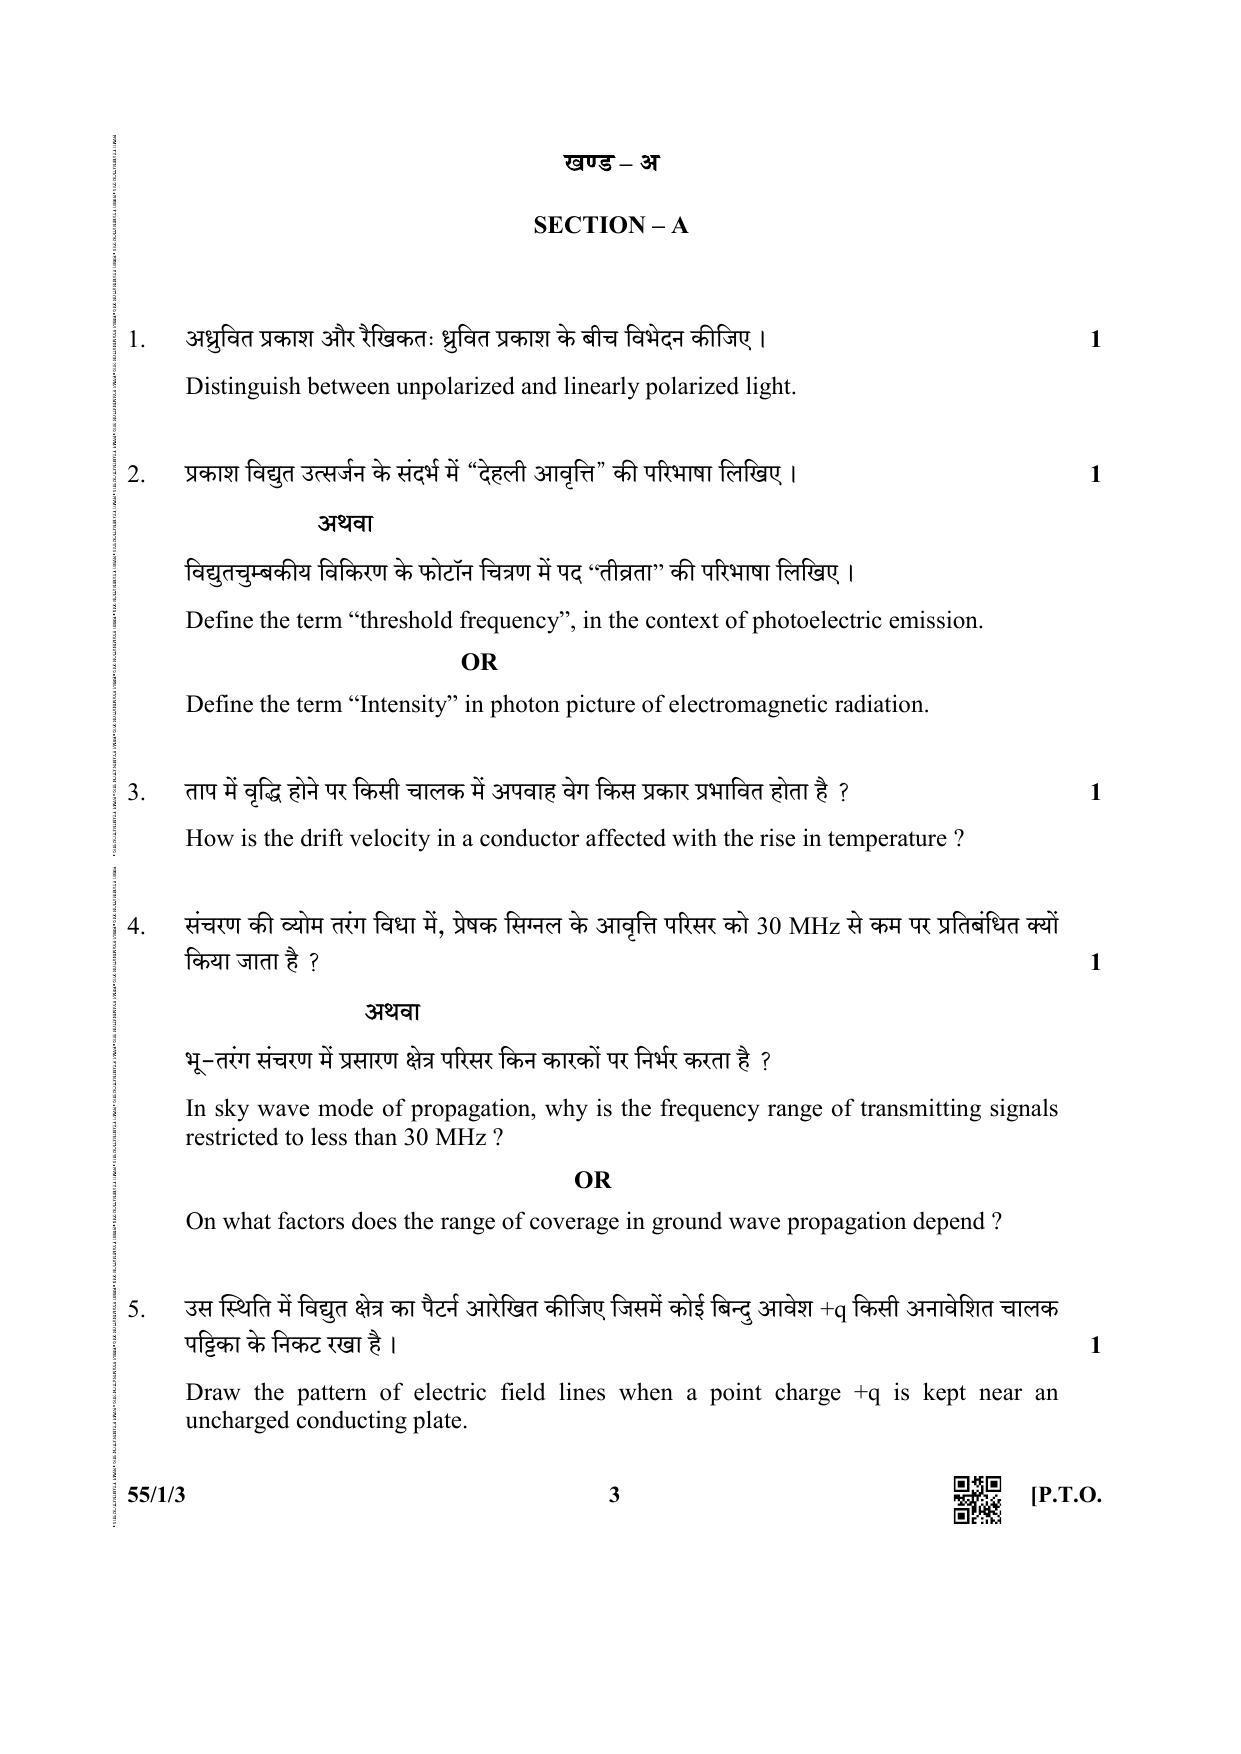 CBSE Class 12 55-1-3 (Physics) 2019 Question Paper - Page 3